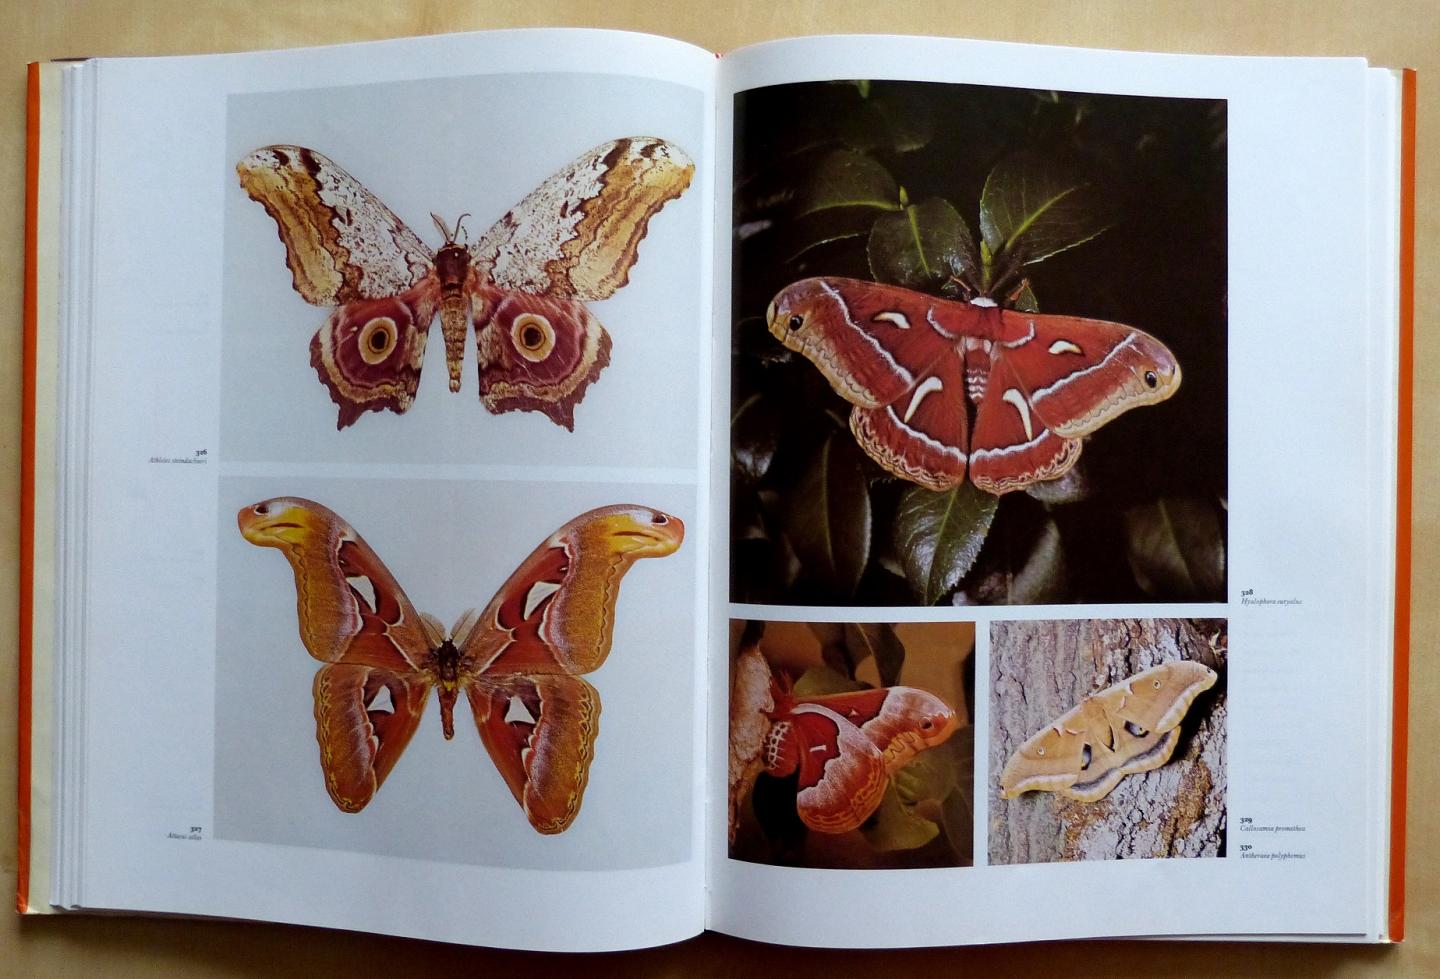 Watson, Allan - Paul E.S. Whalley - The dictionary of Butterflies & Moths in color